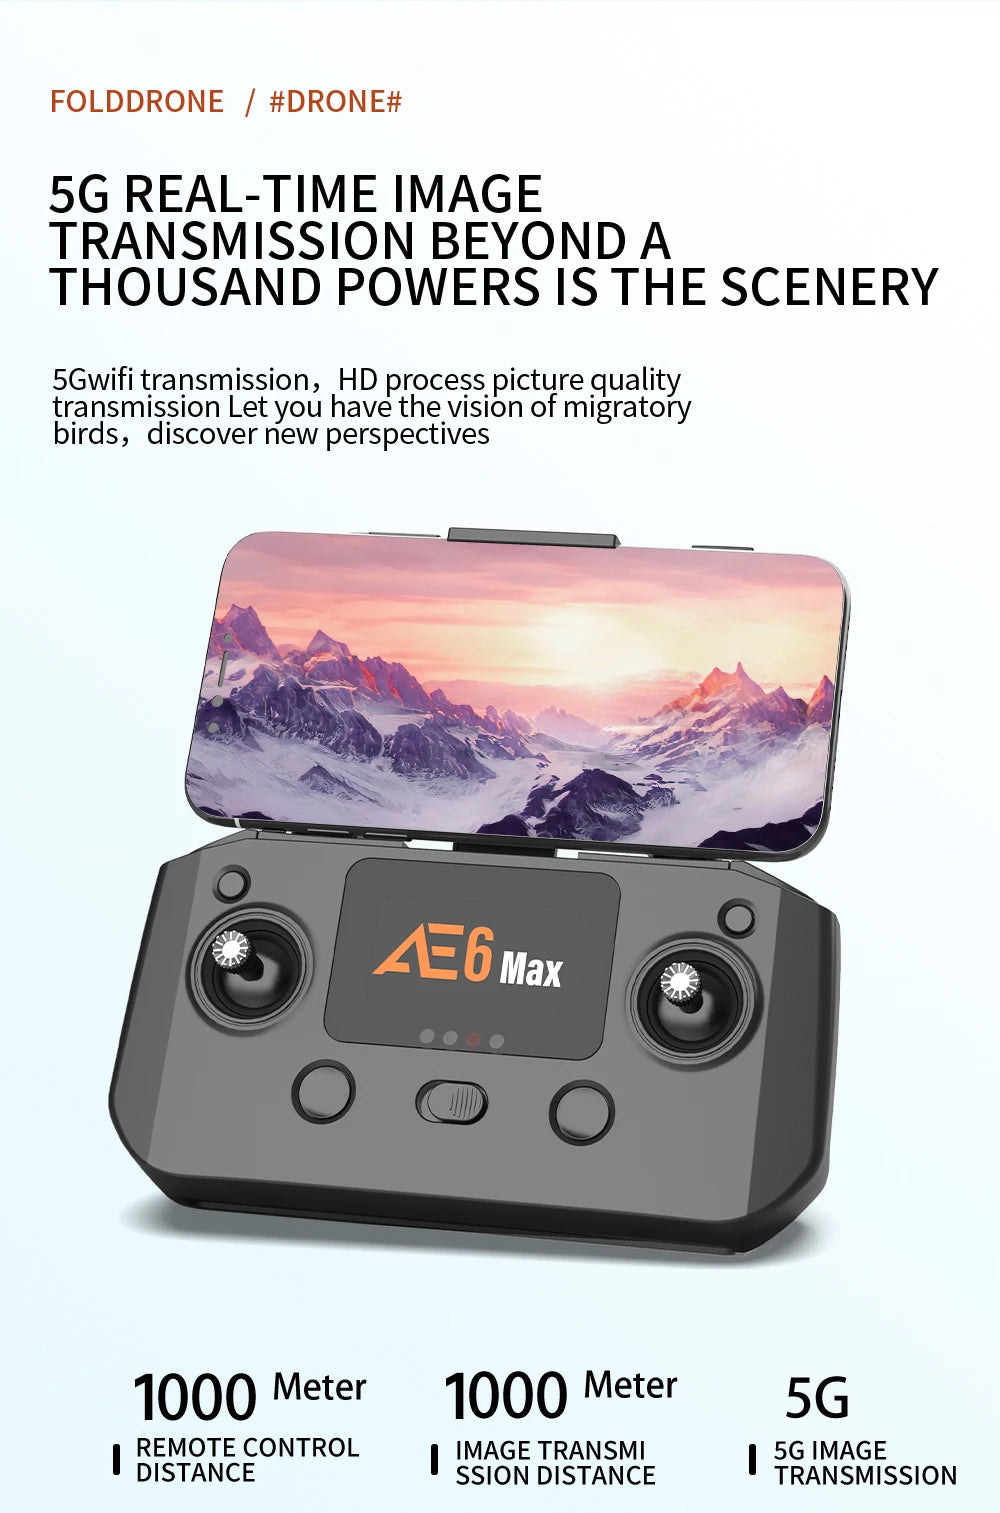 New AE6 / AE6 Max Drone, FOLDDRONE #DRONE# 56 REAL-TIME IMAGE TRANSMISS